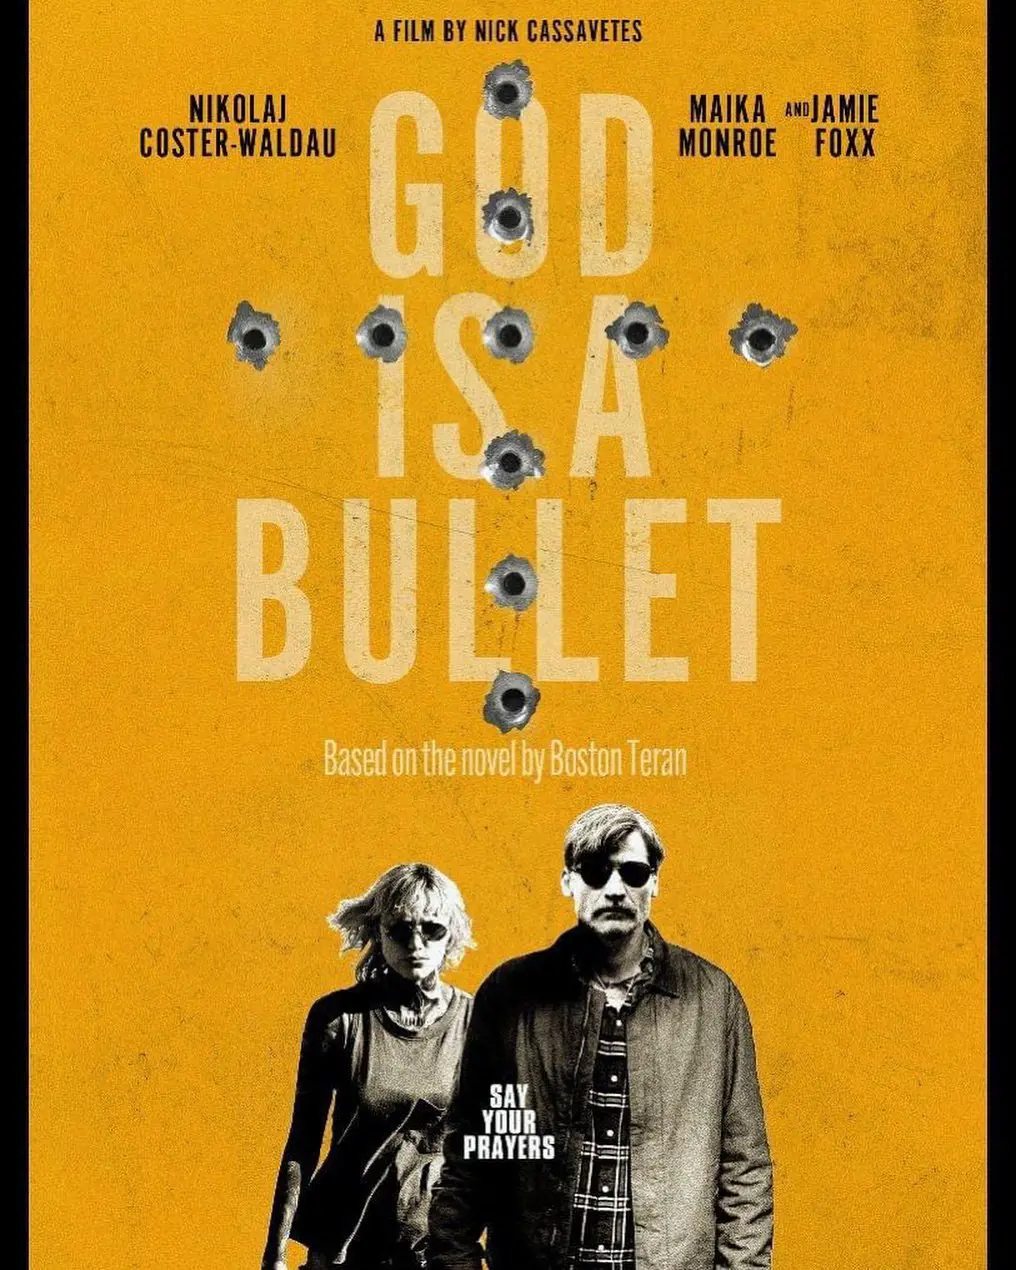 God is a Bullet is a new movie based on a novel. 